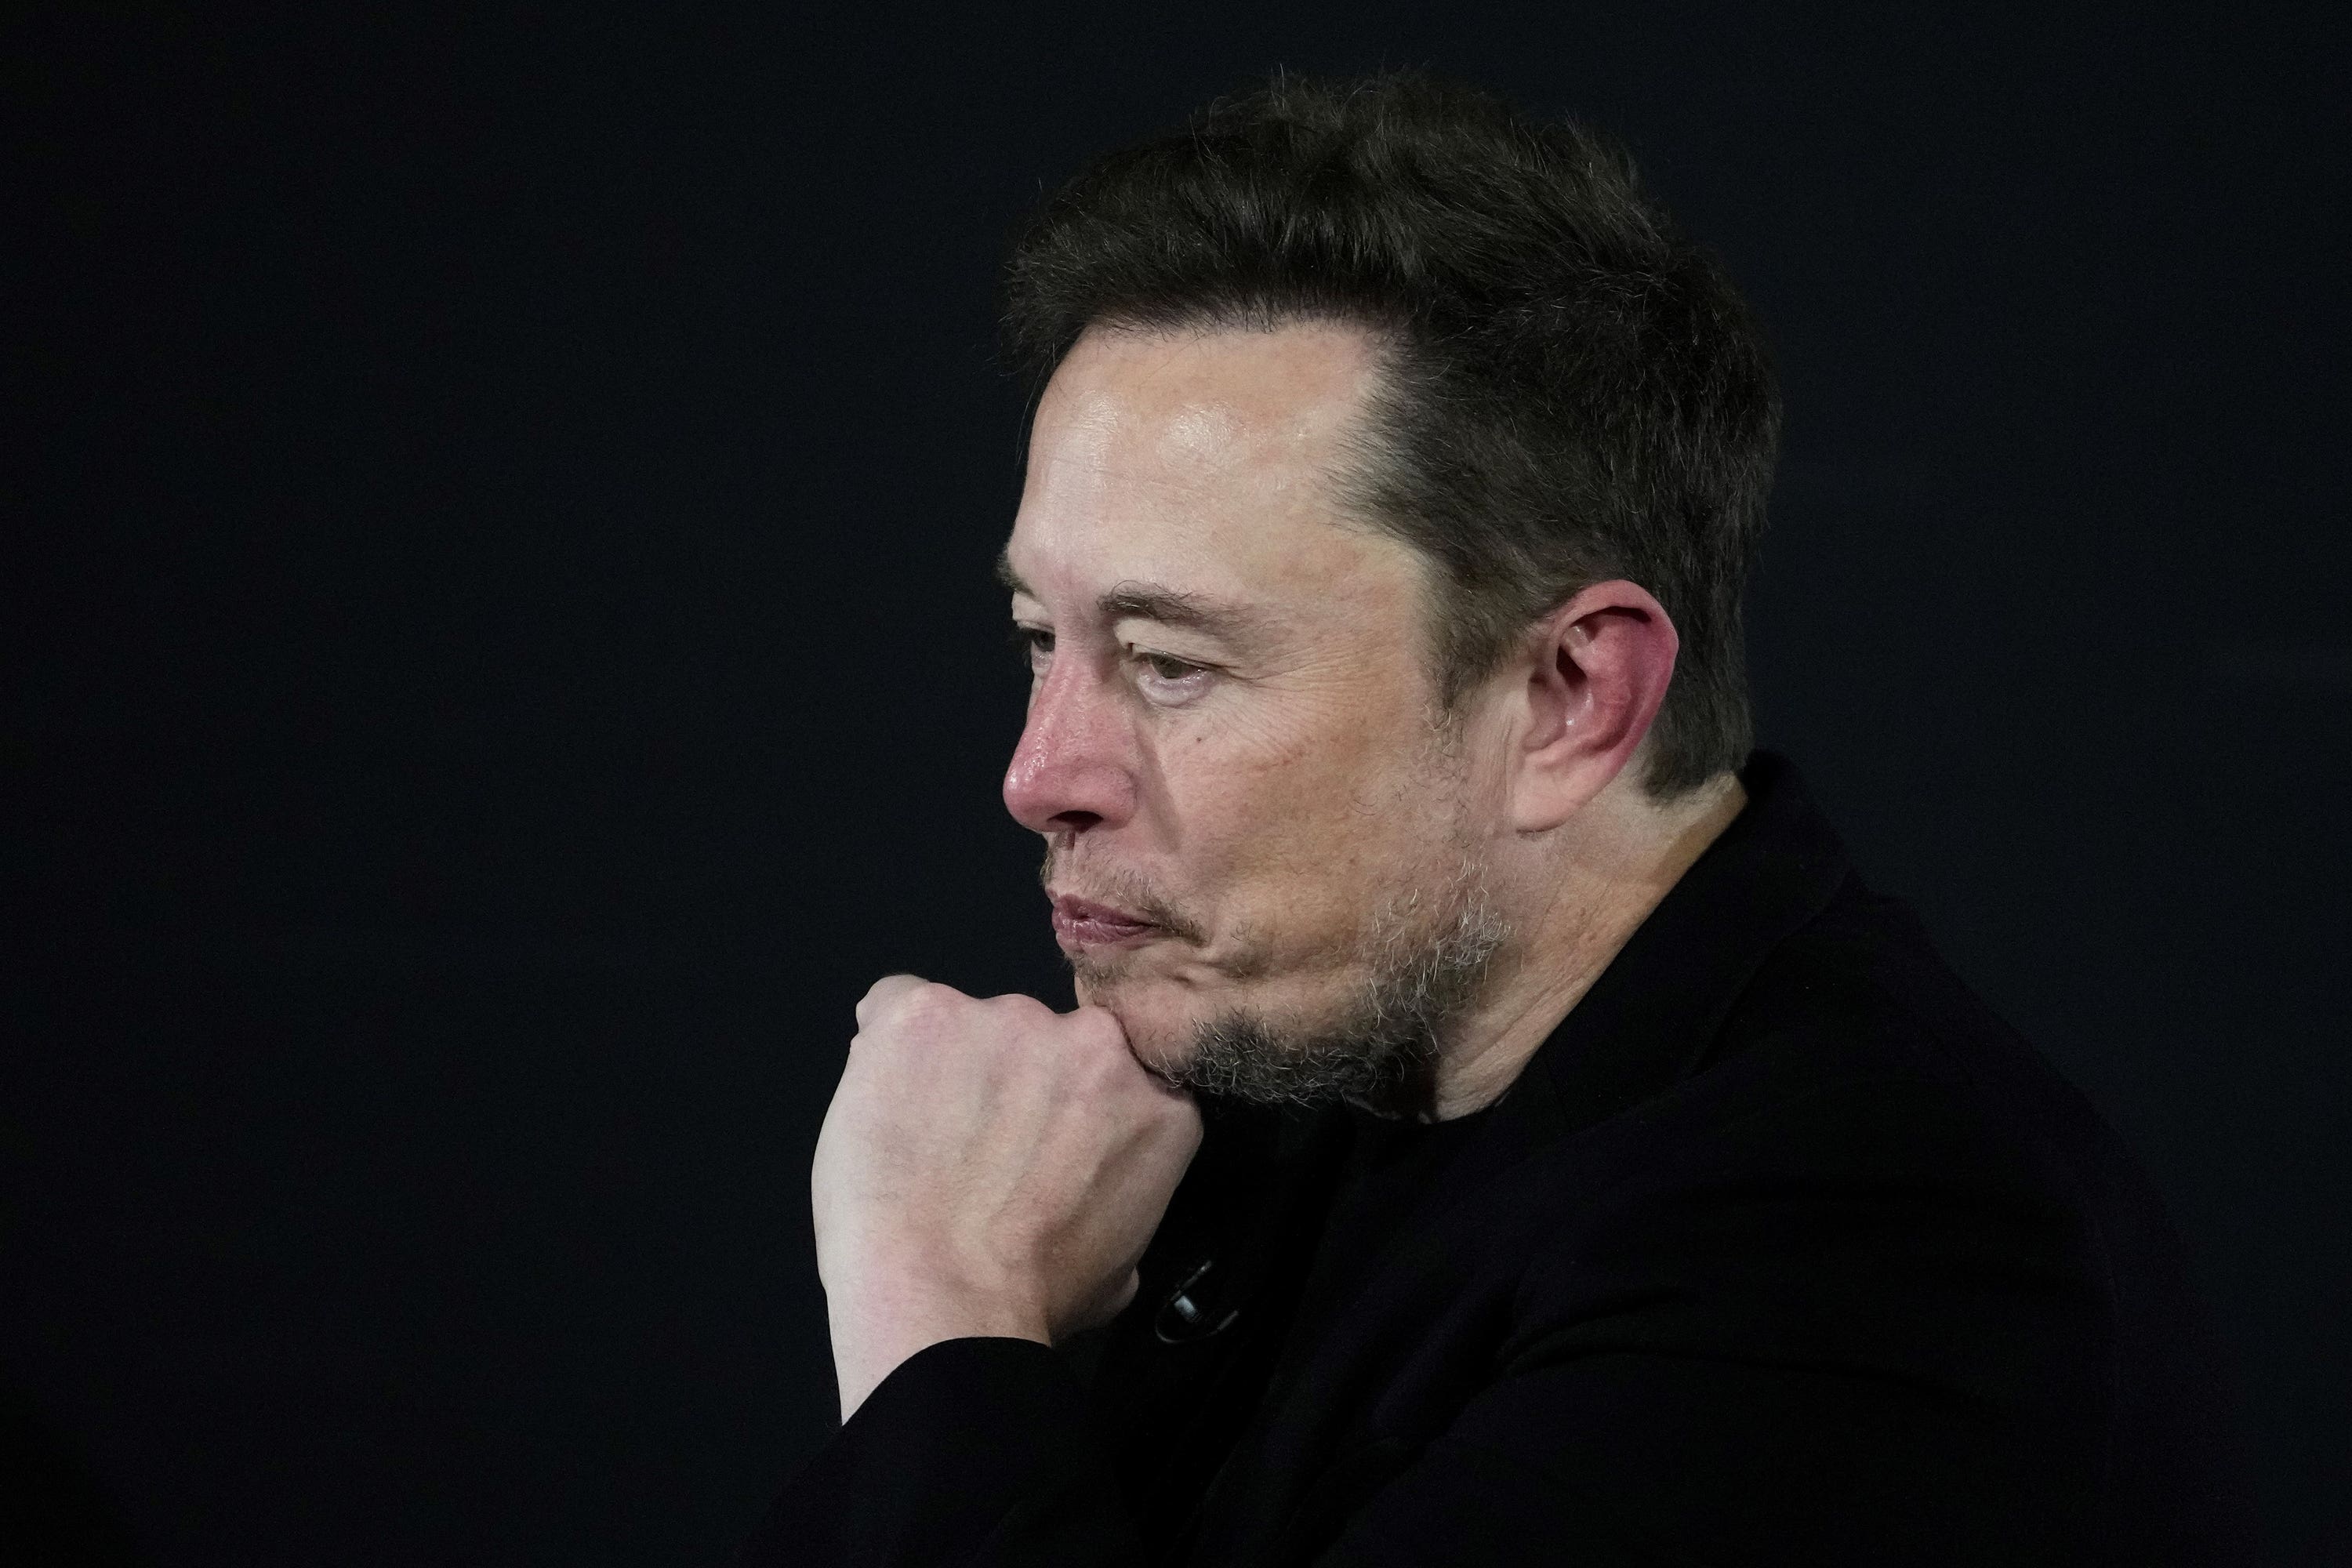 Elon Musk said his start-up firm Neuralink has successfully implanted a computer chip into a human’s brain for the first time (Kirsty Wigglesworth/PA)